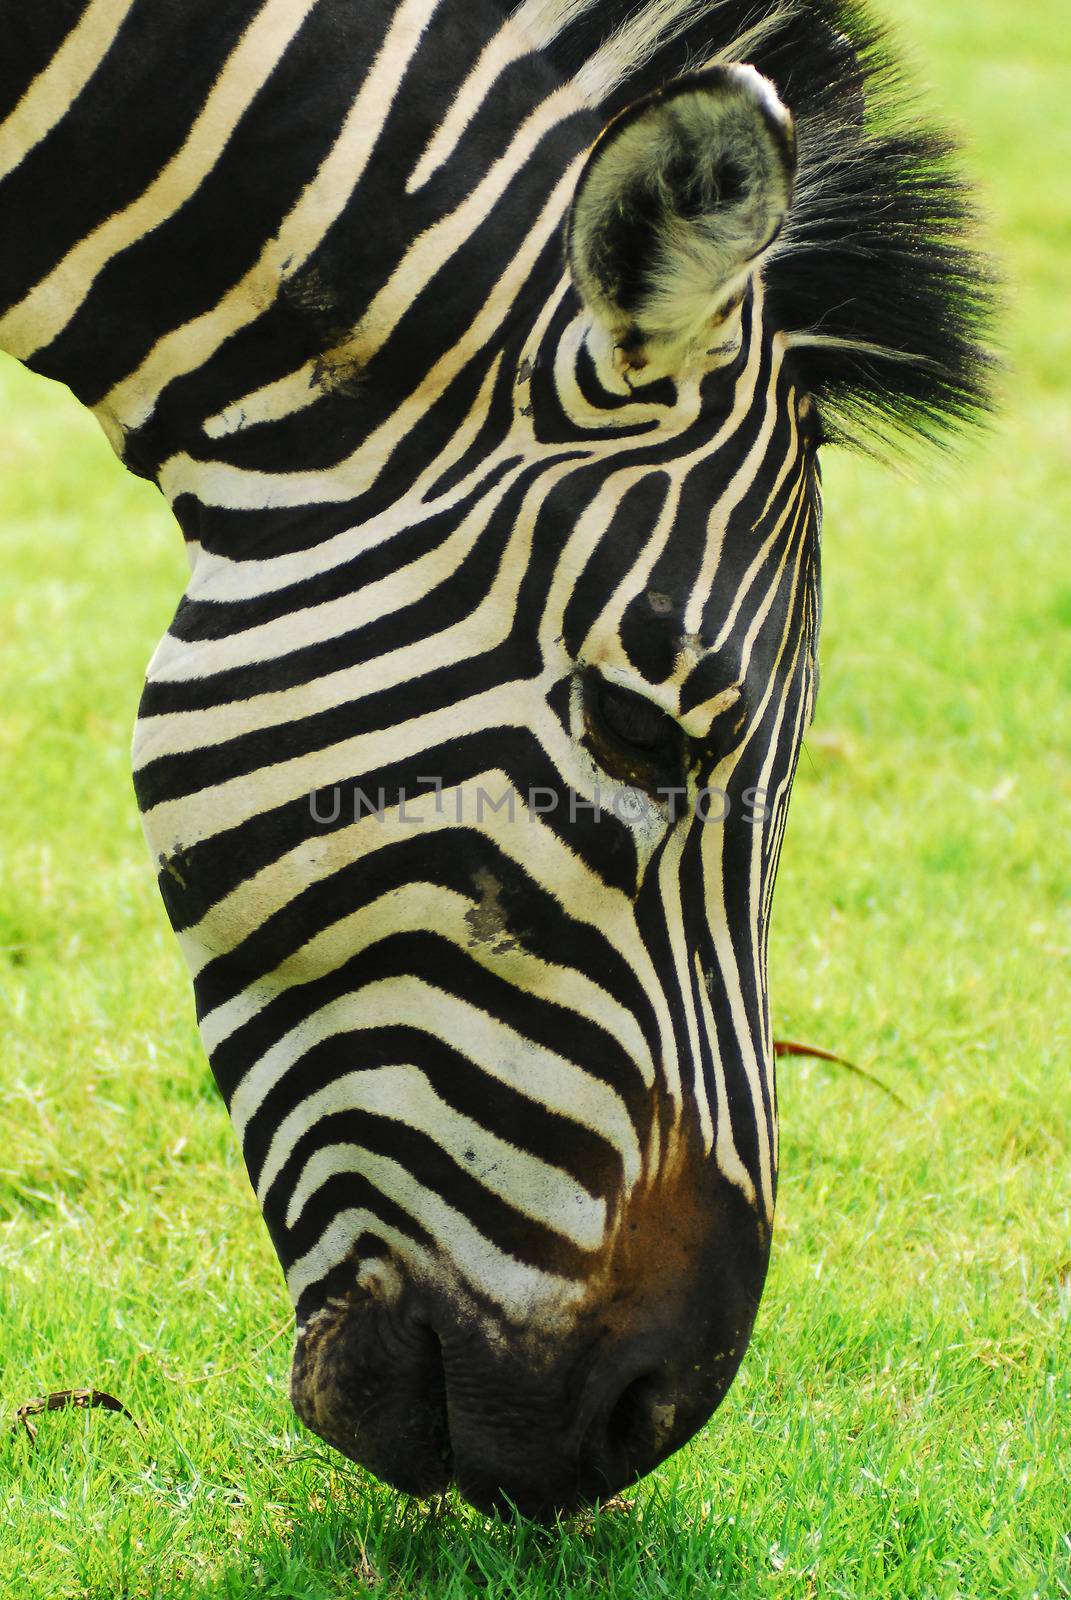 Zebra grazing in a green field by think4photop